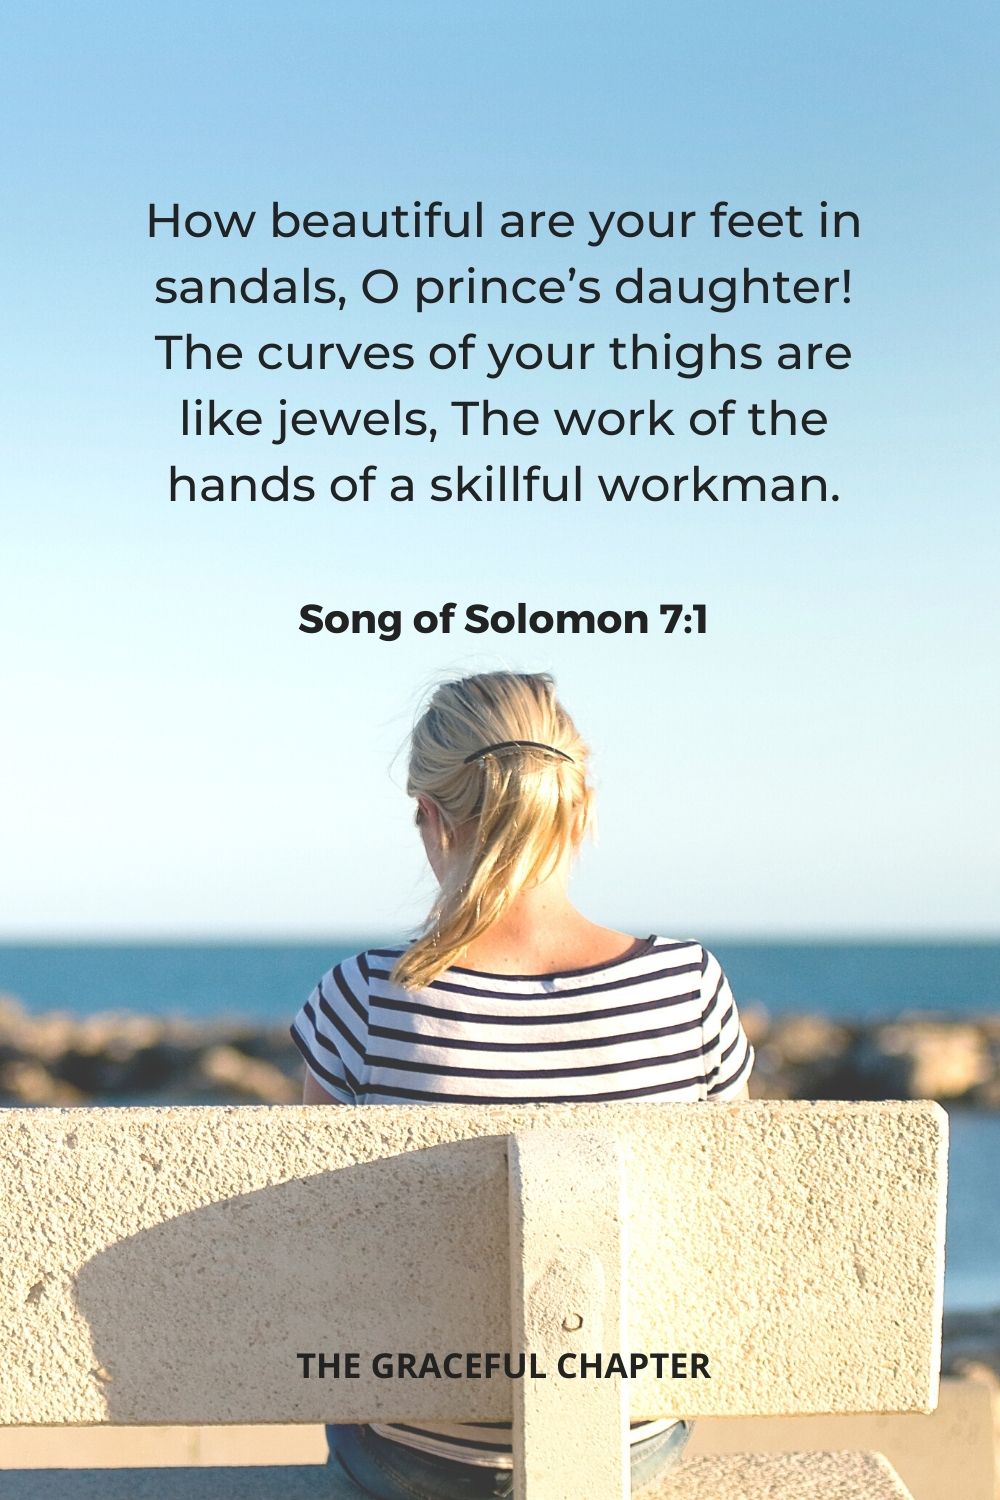 How beautiful are your feet in sandals, O prince’s daughter! The curves of your thighs are like jewels, The work of the hands of a skillful workman.